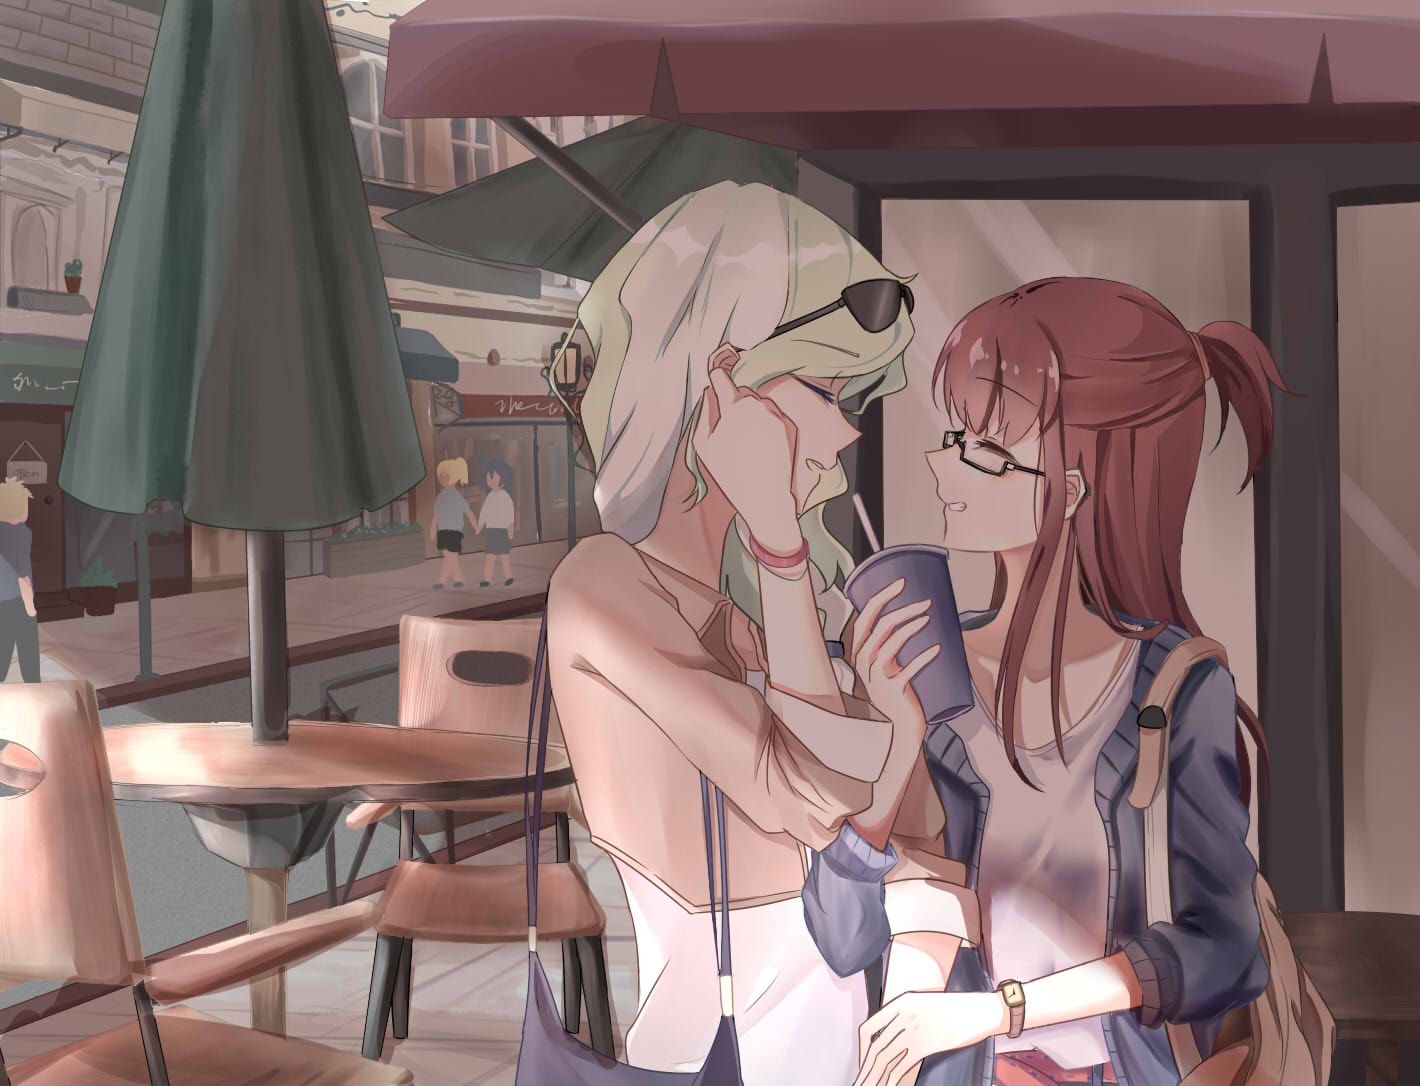 2girls bespectacled blonde_hair brown_hair casual couple diana_cavendish glasses kagari_atsuko little_witch_academia locked_arms mimmf multiple_girls shade smile town watch watch yuri